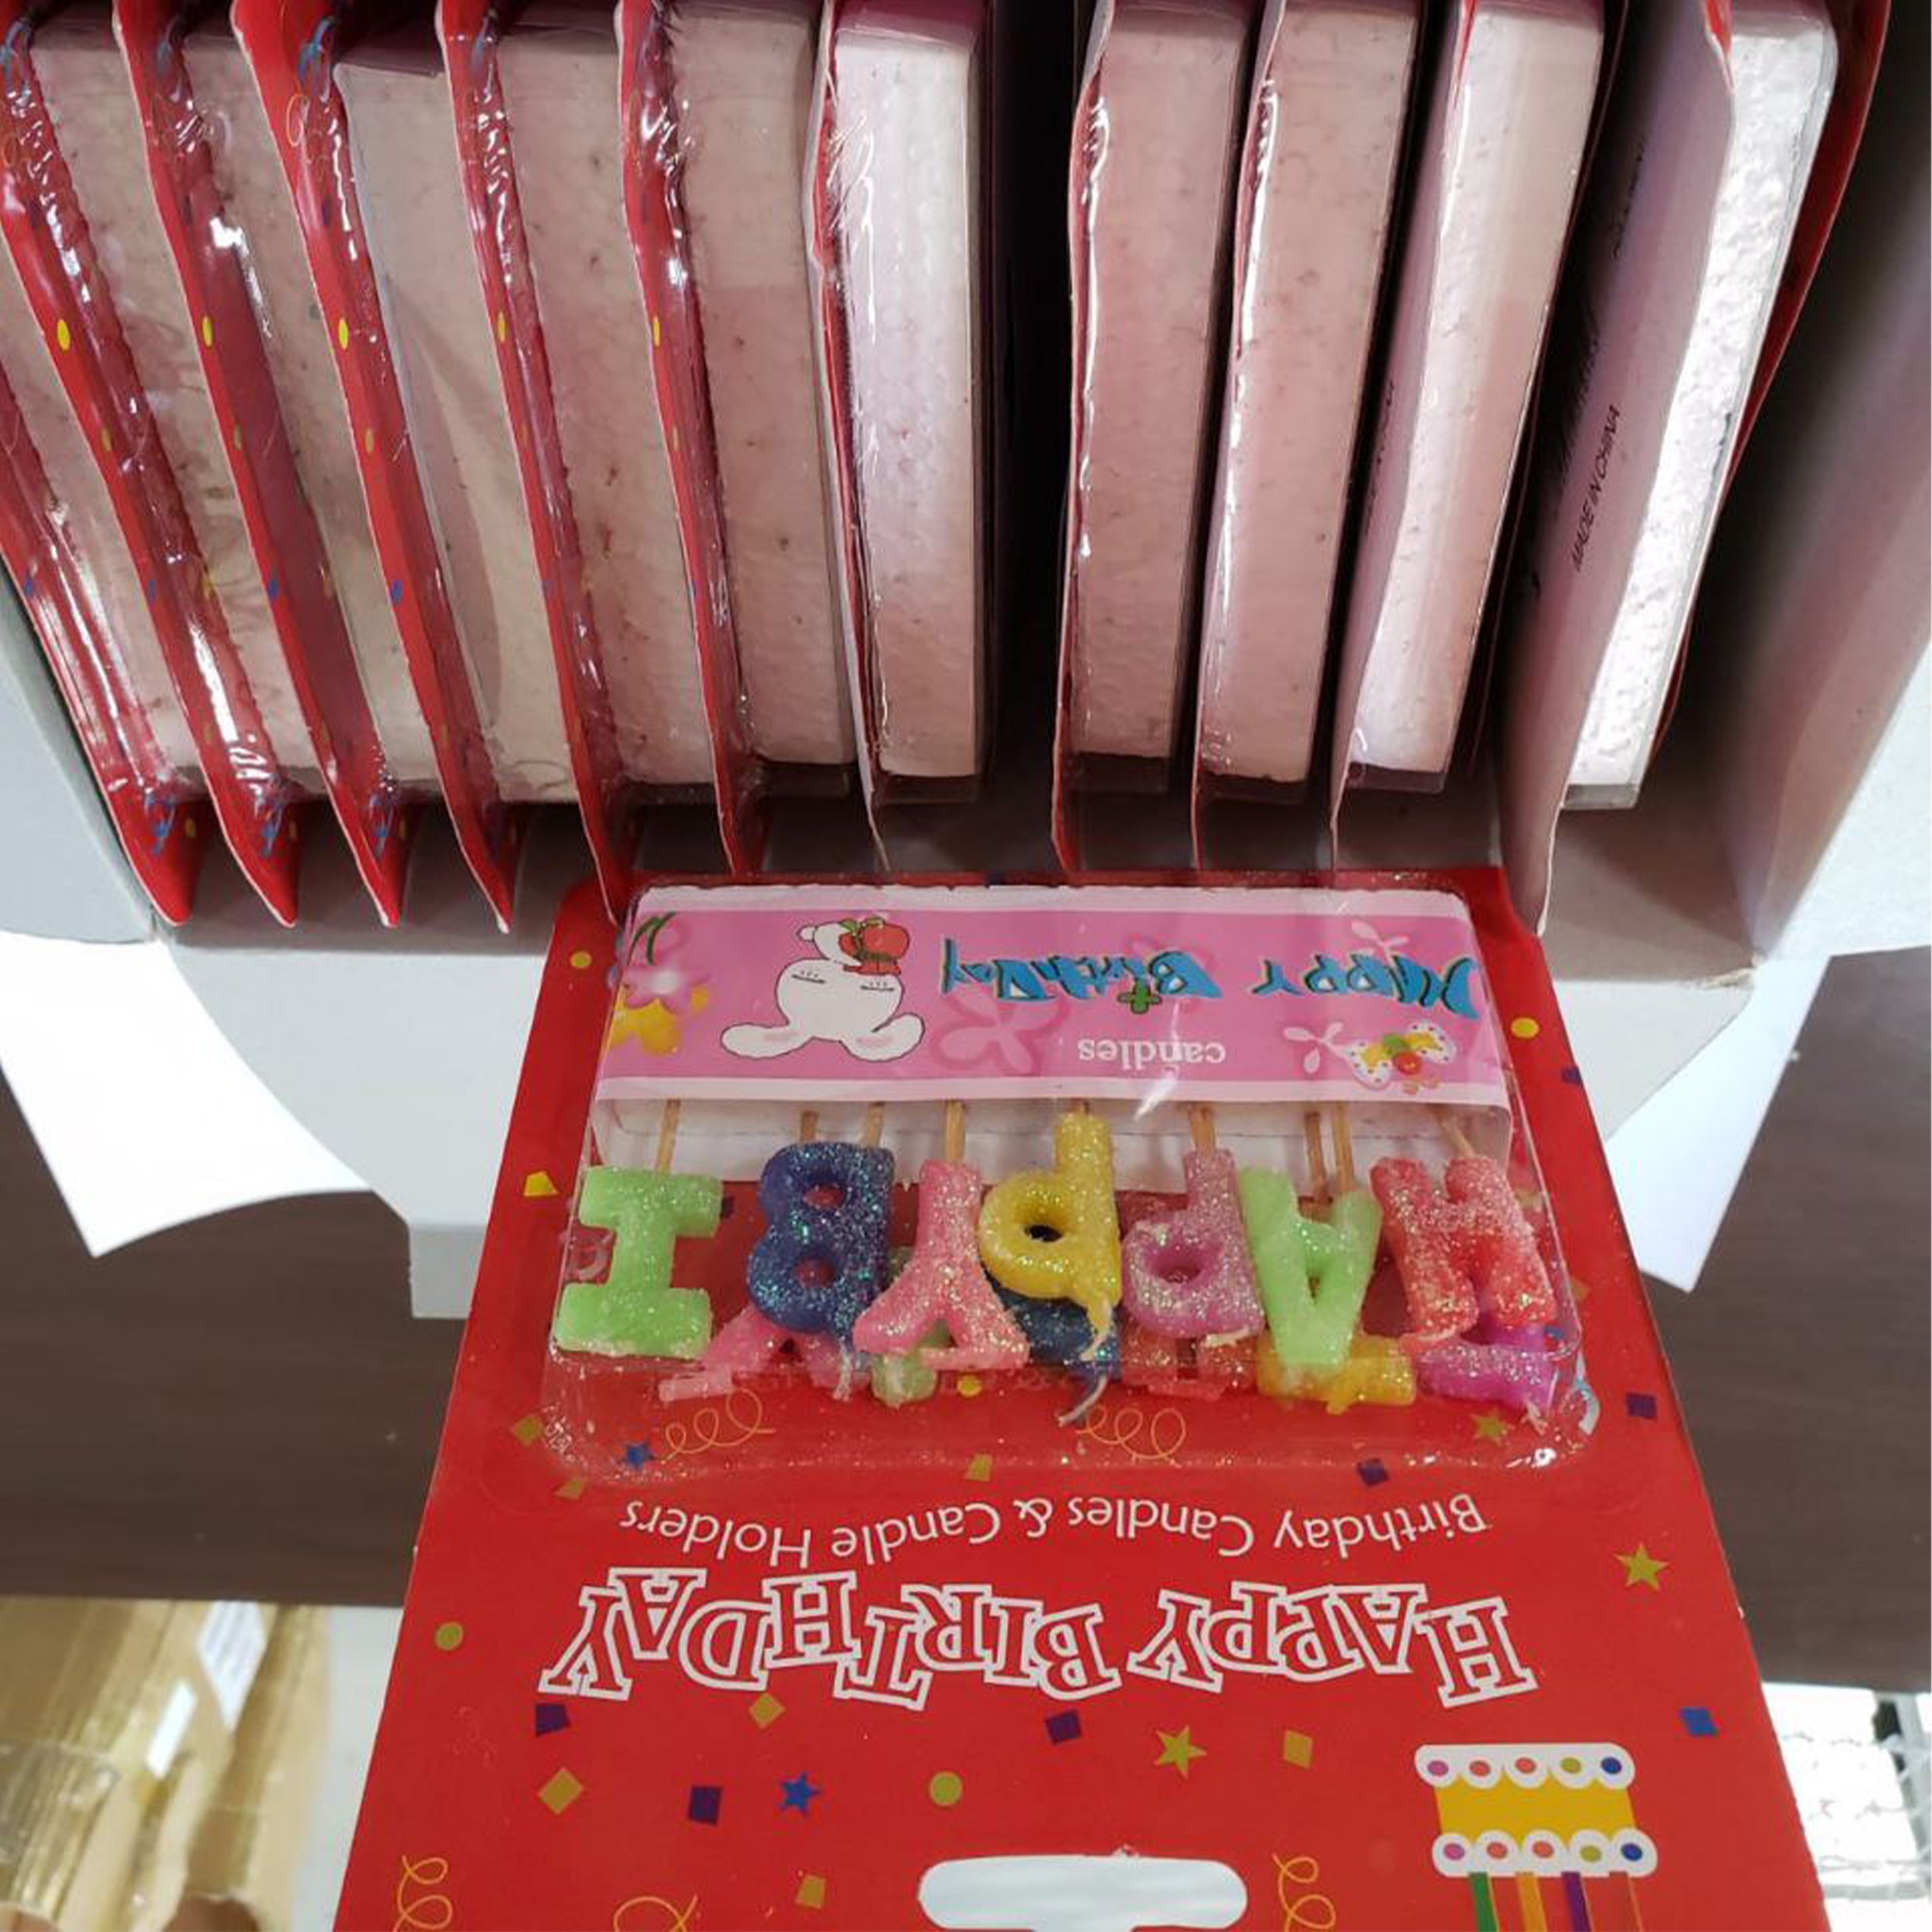 Glitter Text Happy Birthday Candles - Perfect for Any Celebration